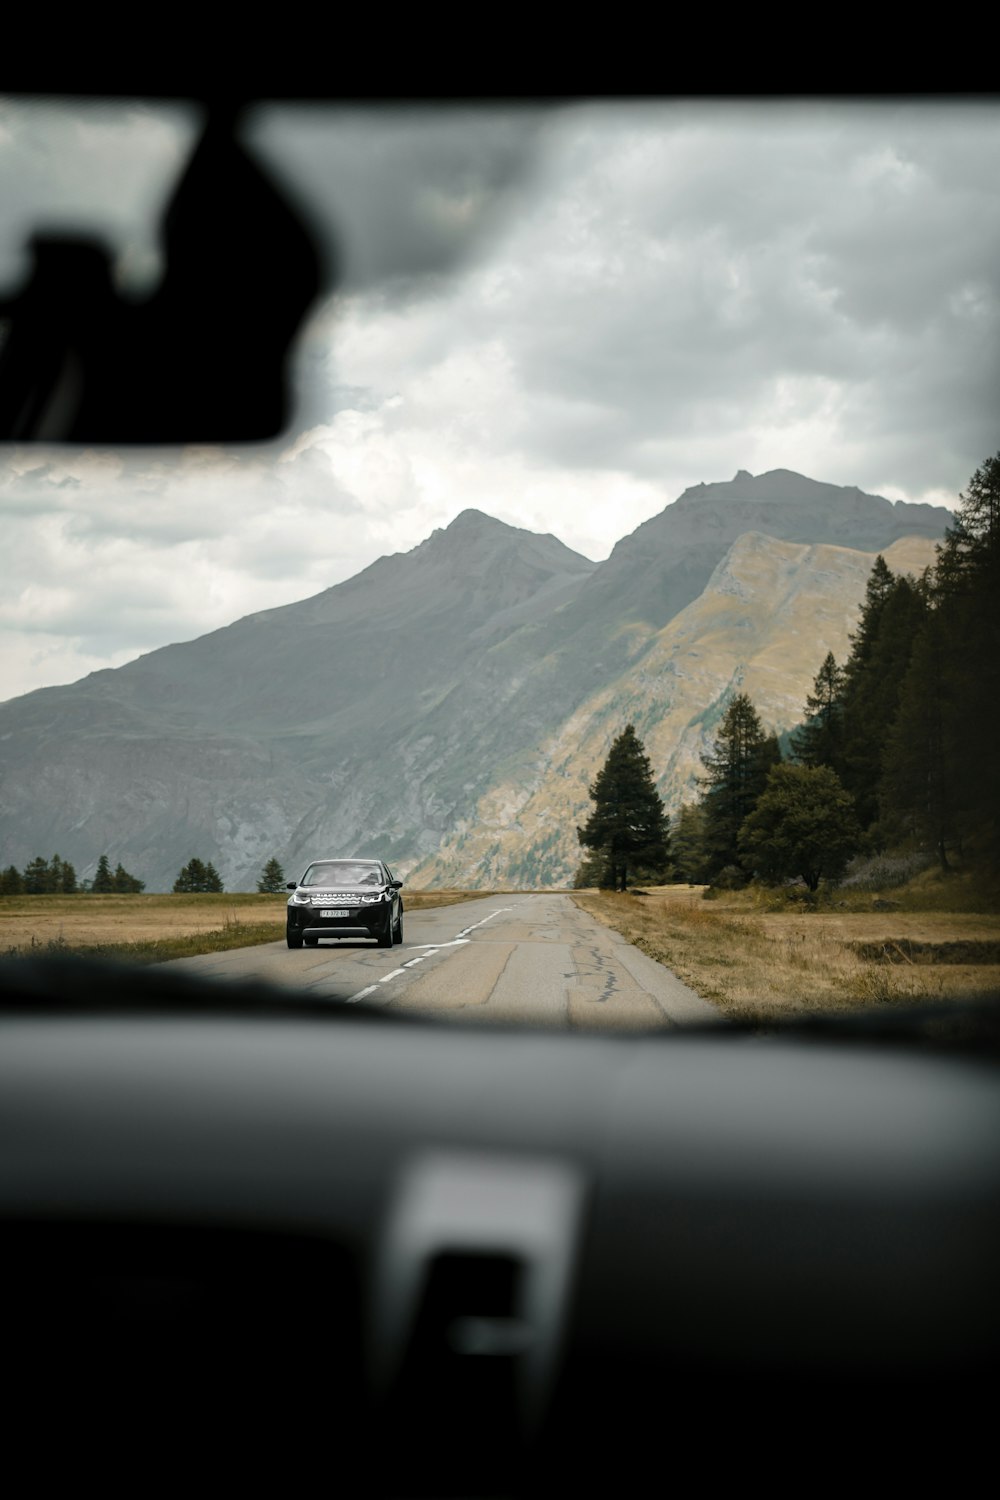 a car driving on a road with mountains in the background